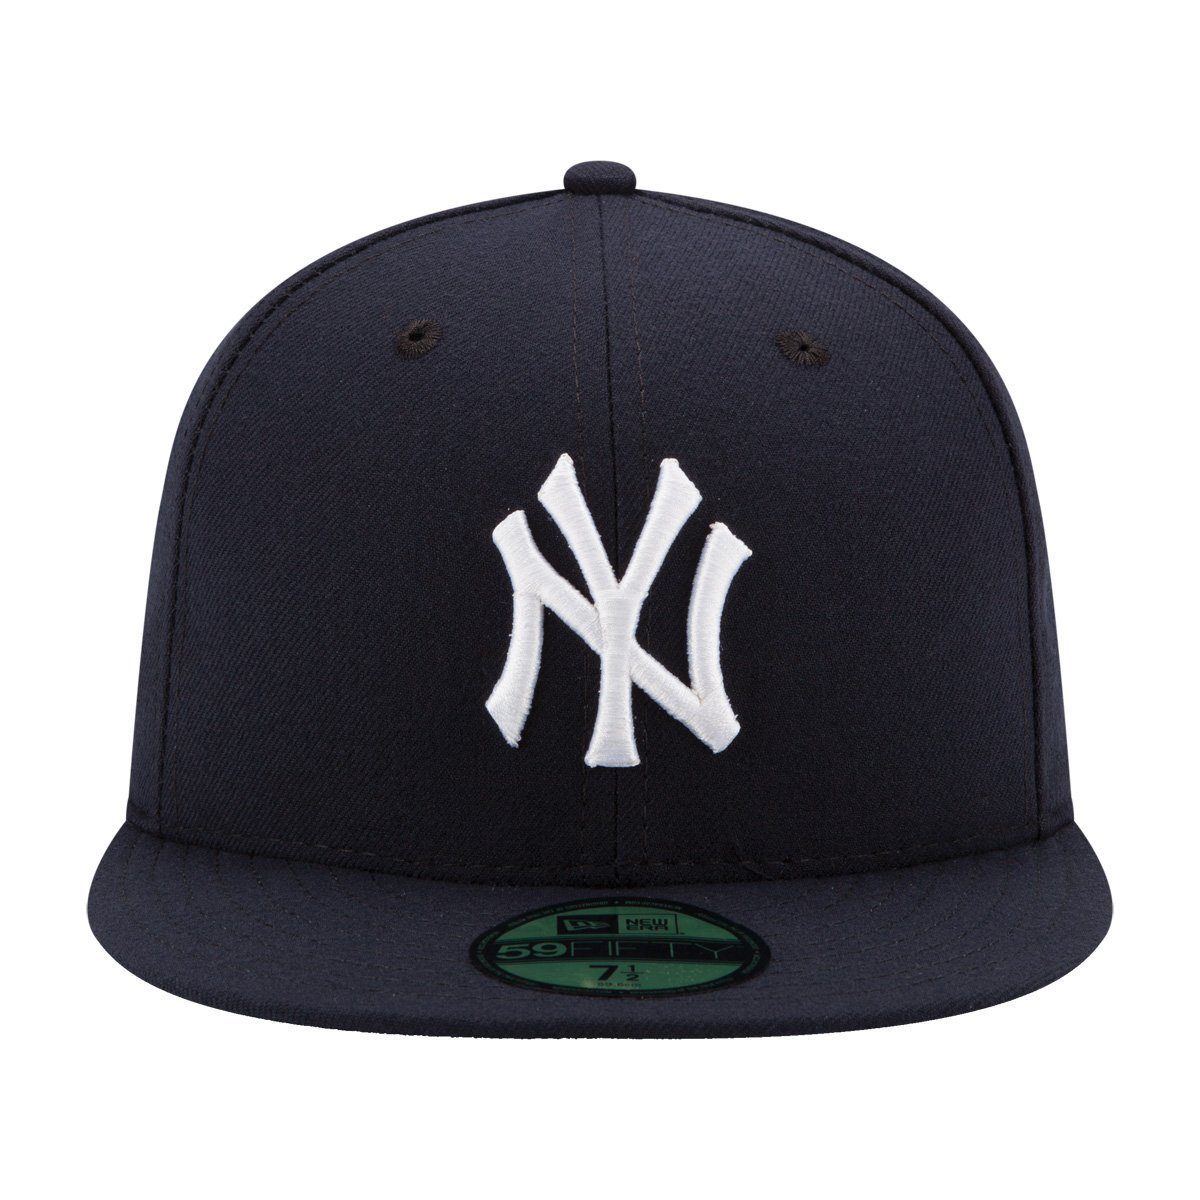 59Fifty Yankees York New Cap New AUTHENTIC Era ONFIELD Fitted